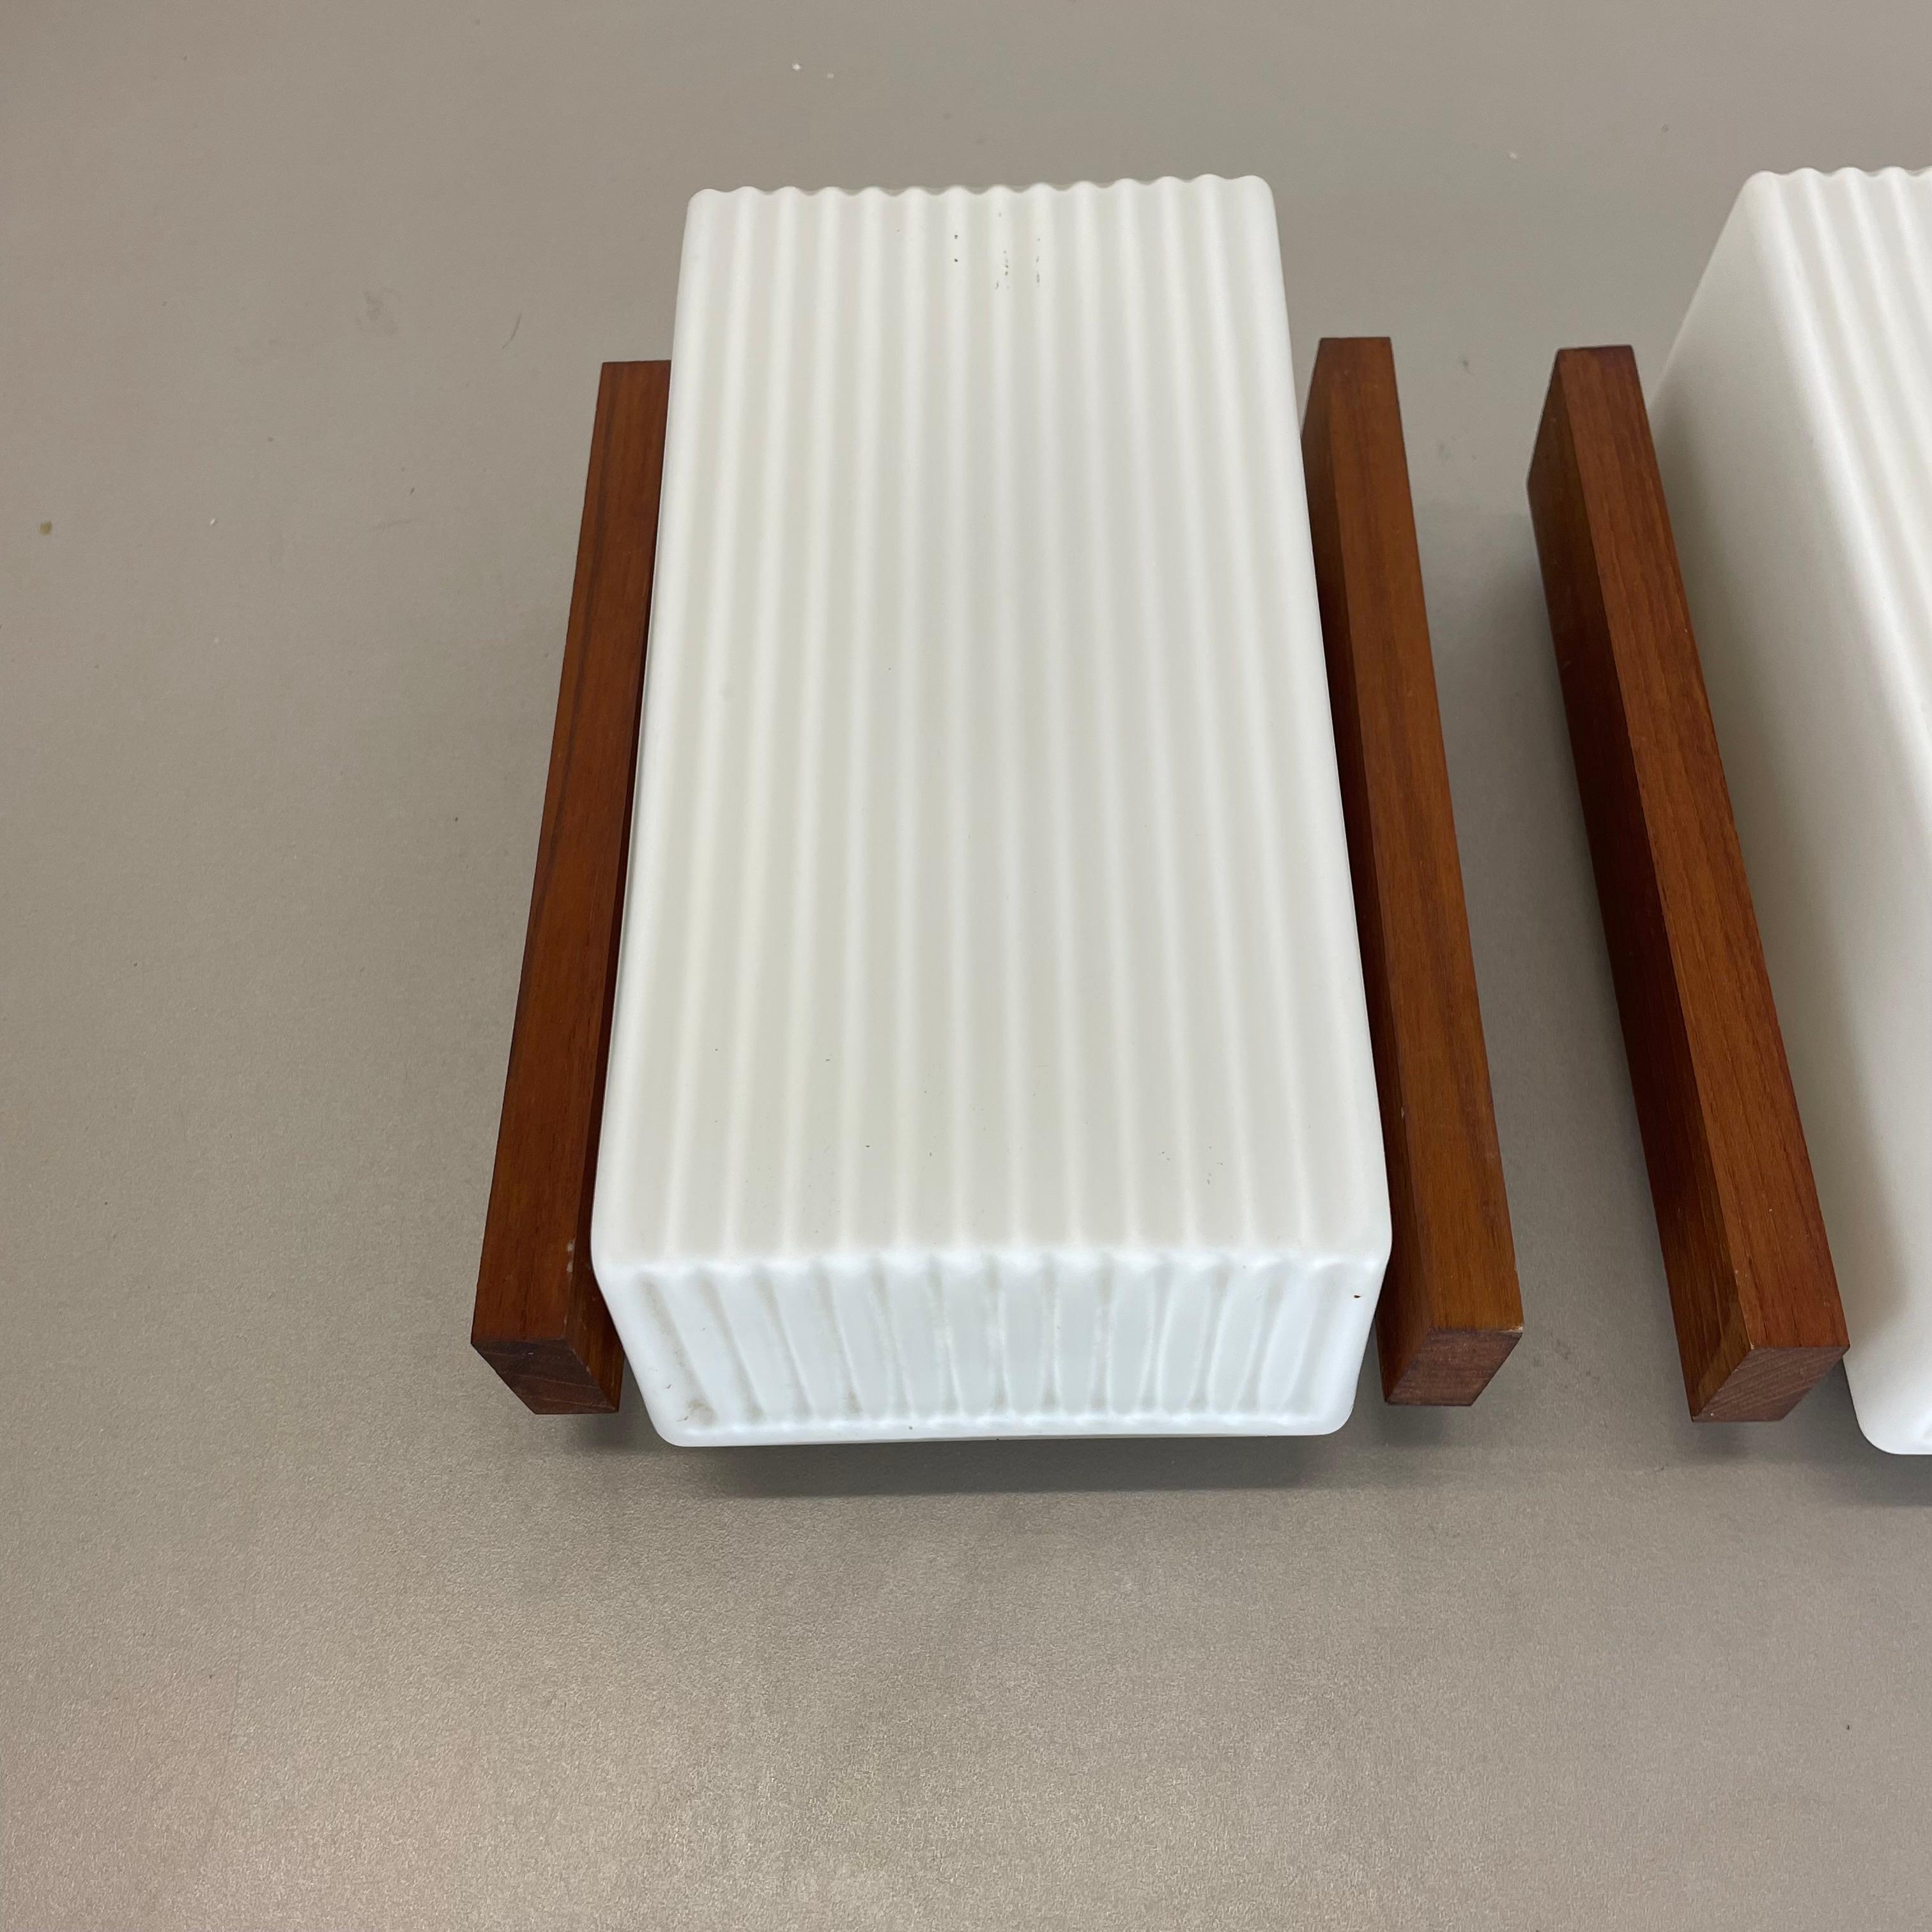 Set of 2 satin white glass and teak Wall Lights by BEGA Lights, Germany 1960s For Sale 3